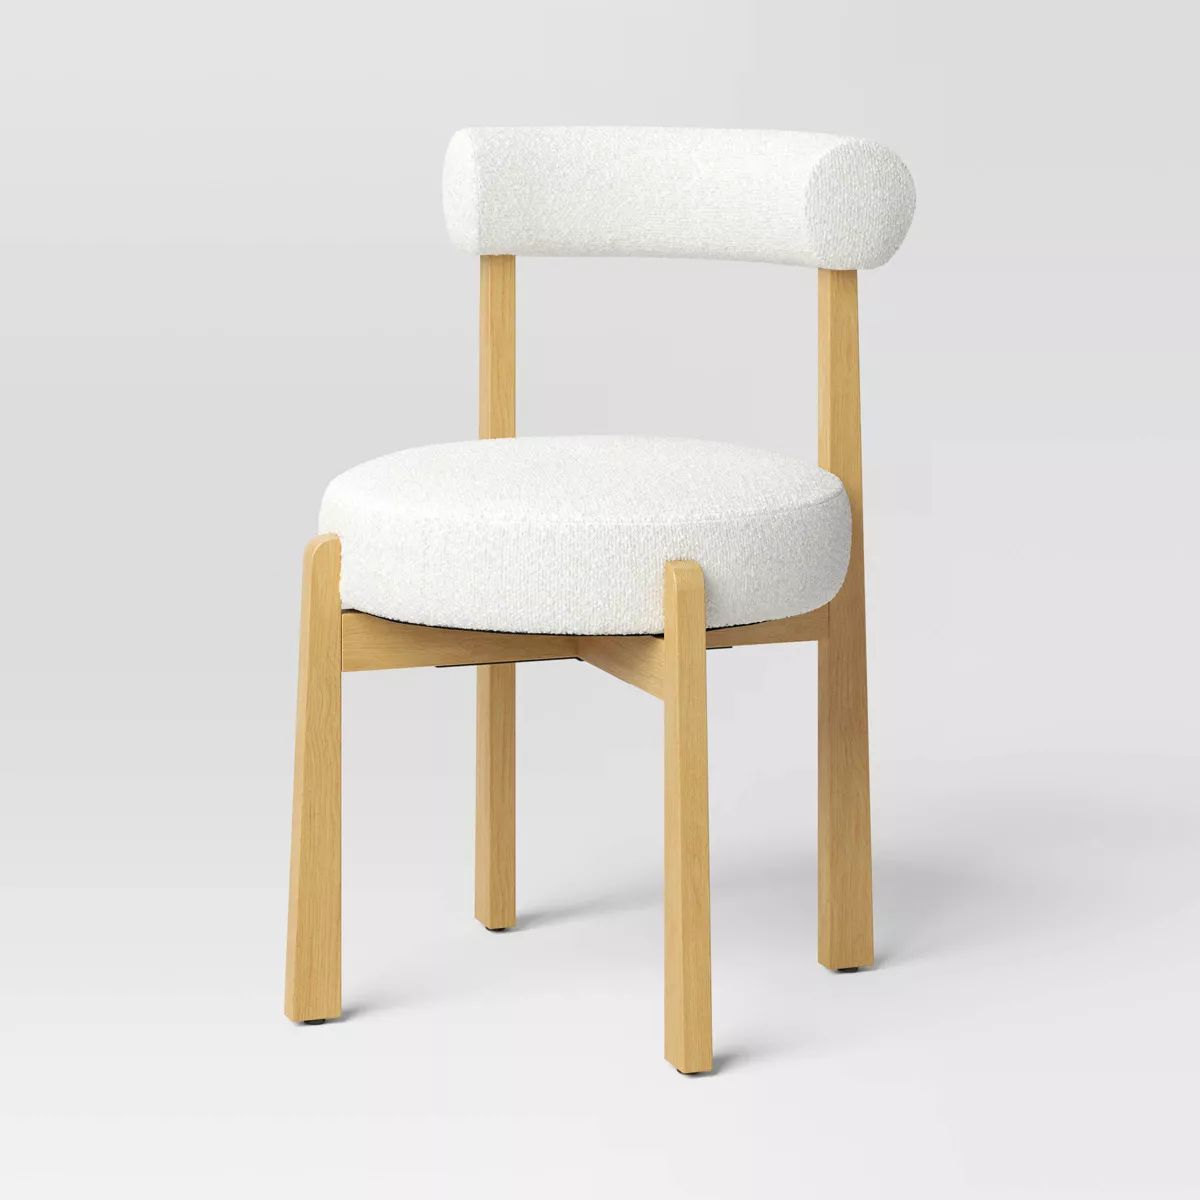 Sculptural Upholstered and Wood Dining Chair Cream - Threshold™ | Target